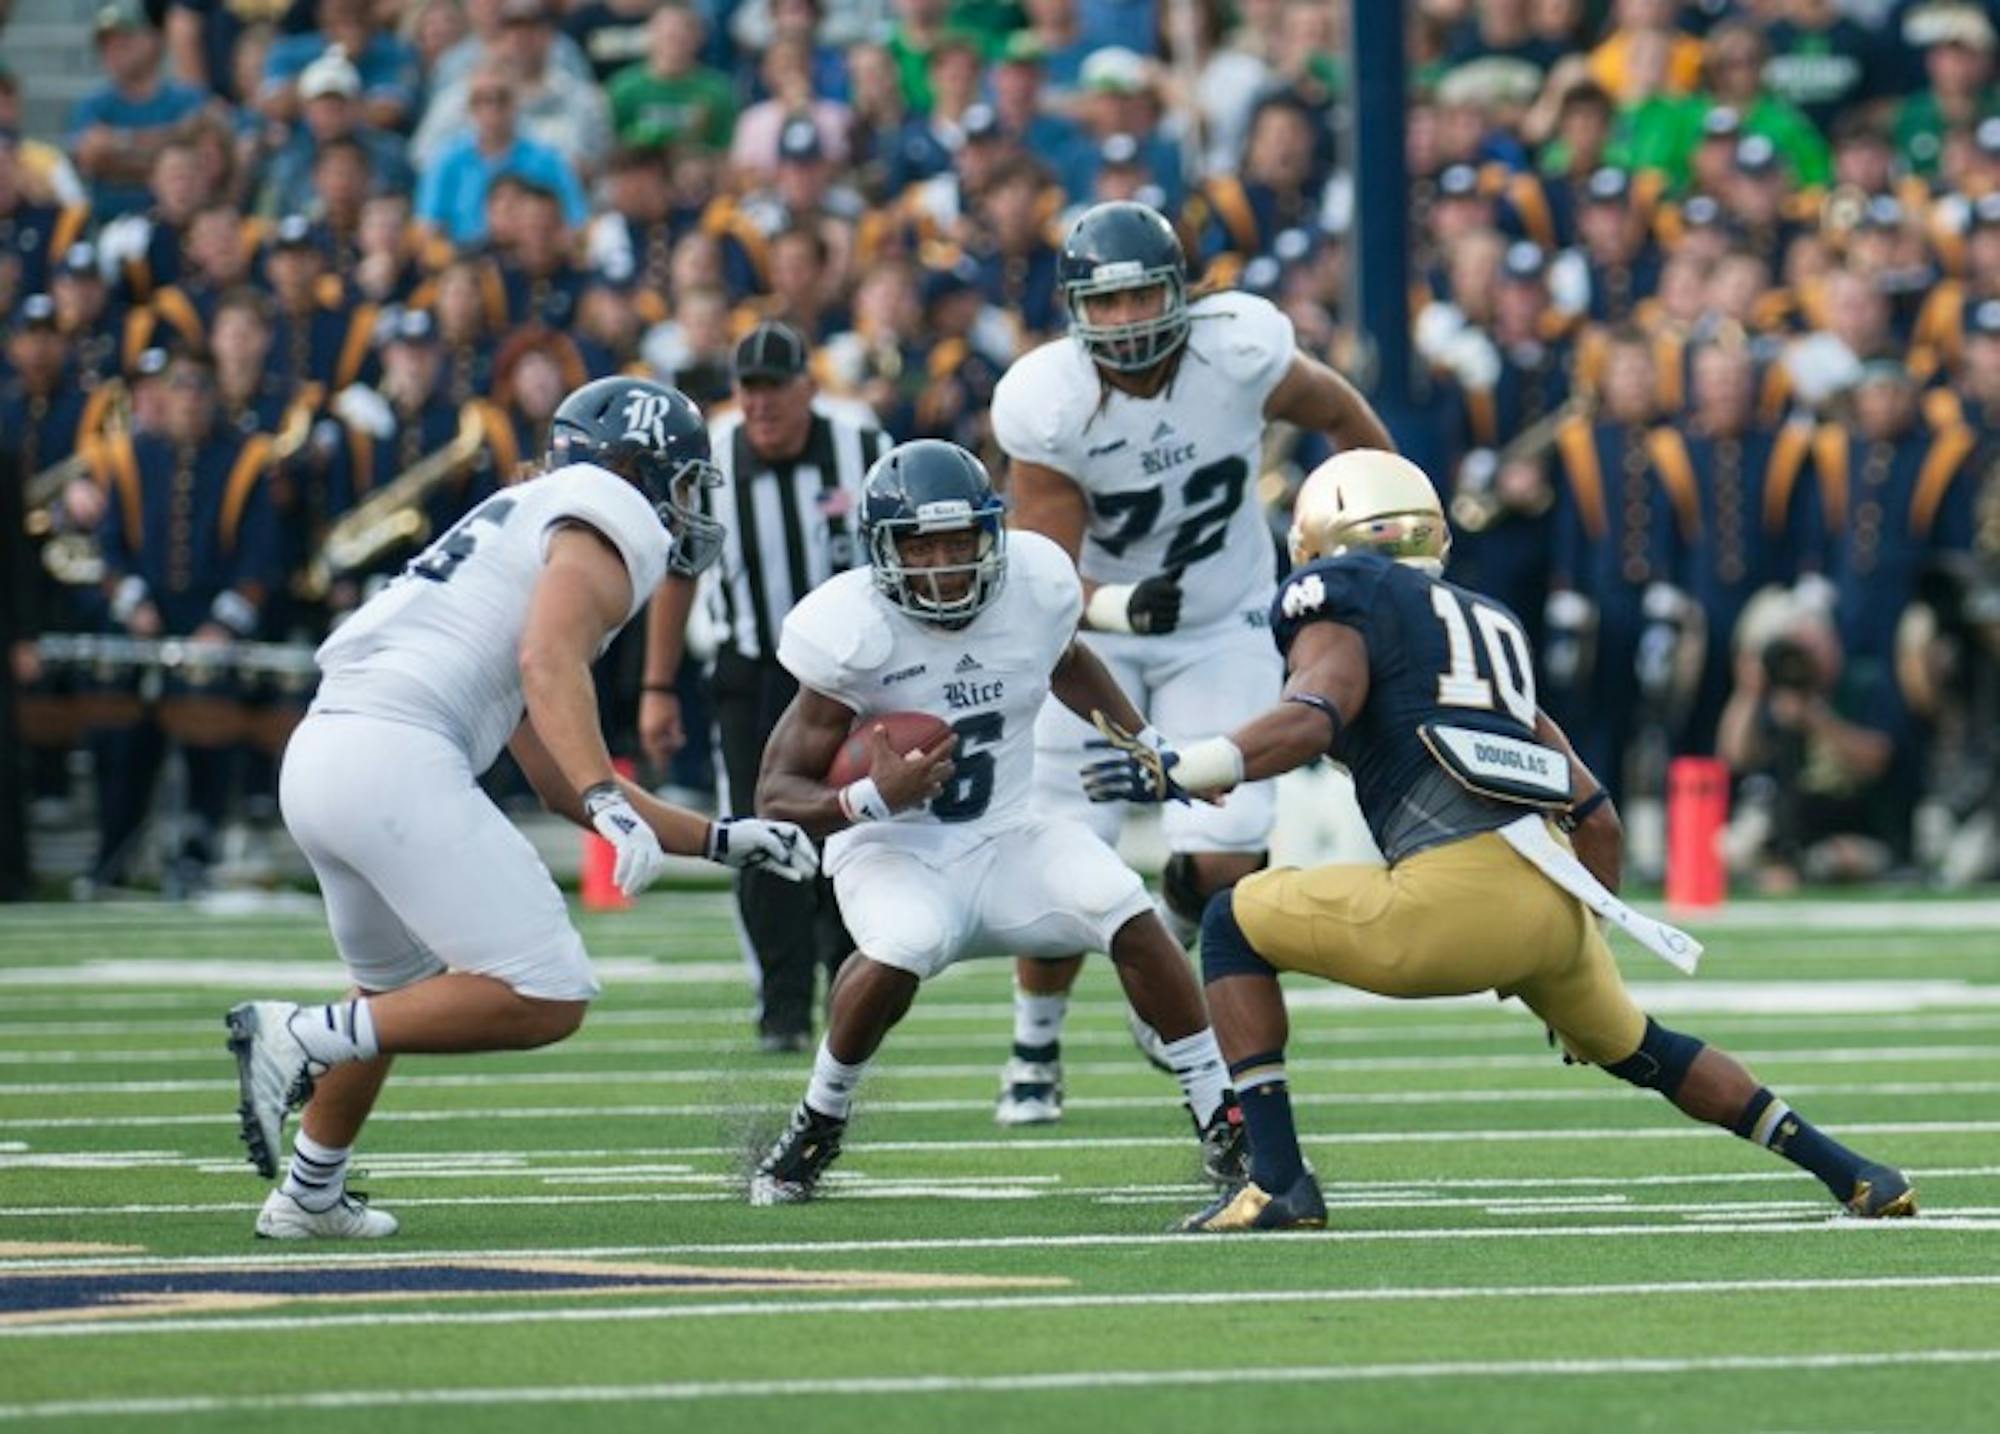 Irish senior safety Max Redfield prepares to tackle the ballcarrier in Notre Dame's 48-17 win over Rice on Aug. 30, 2014. Redfield was dismissed from the team Sunday following his arrest late Friday night.